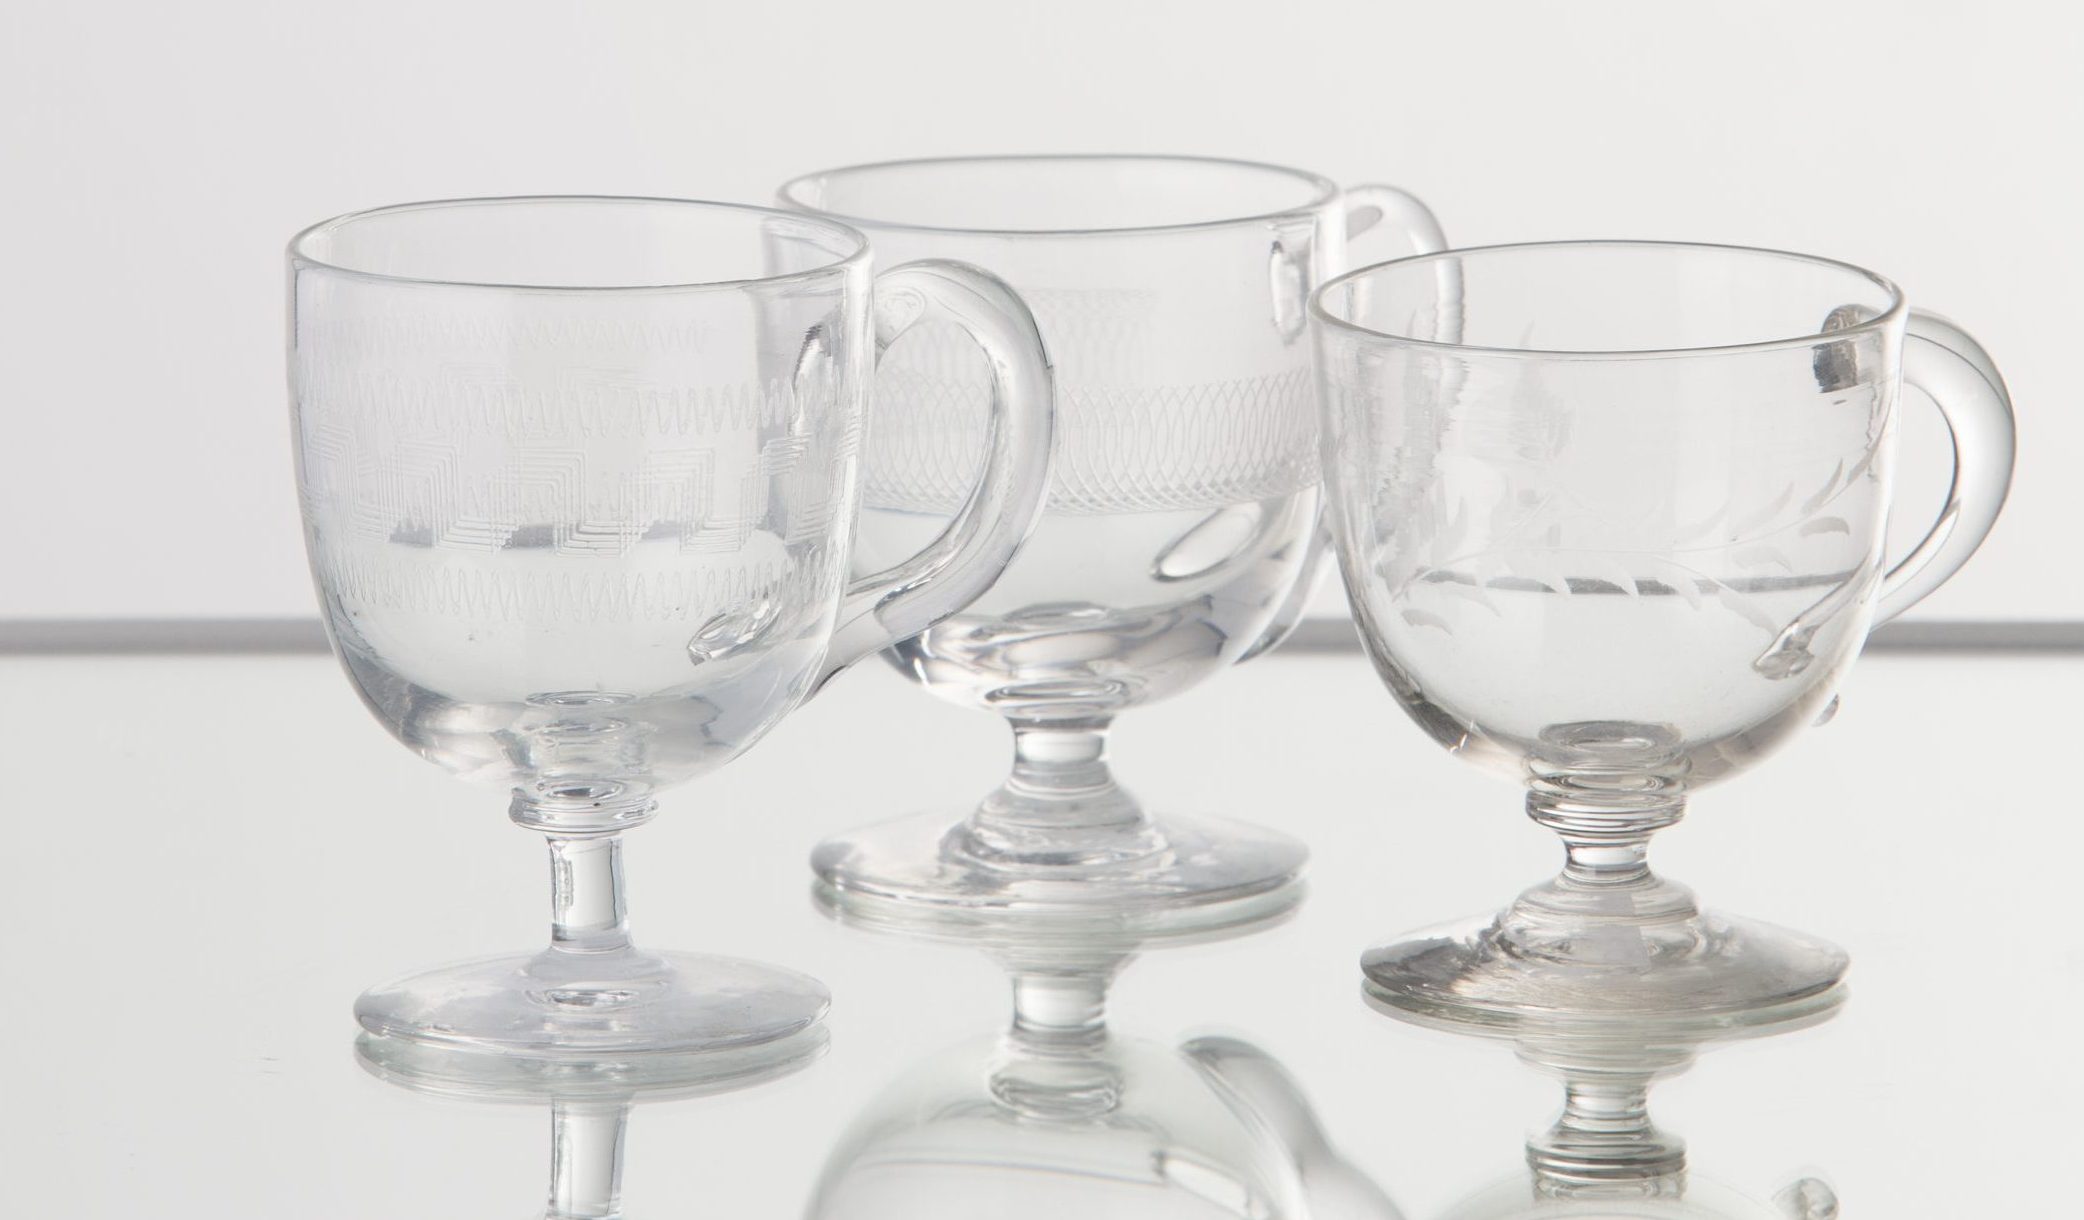 Jelly glasses – Woodstock Glass, Cape Town (1879-1886)